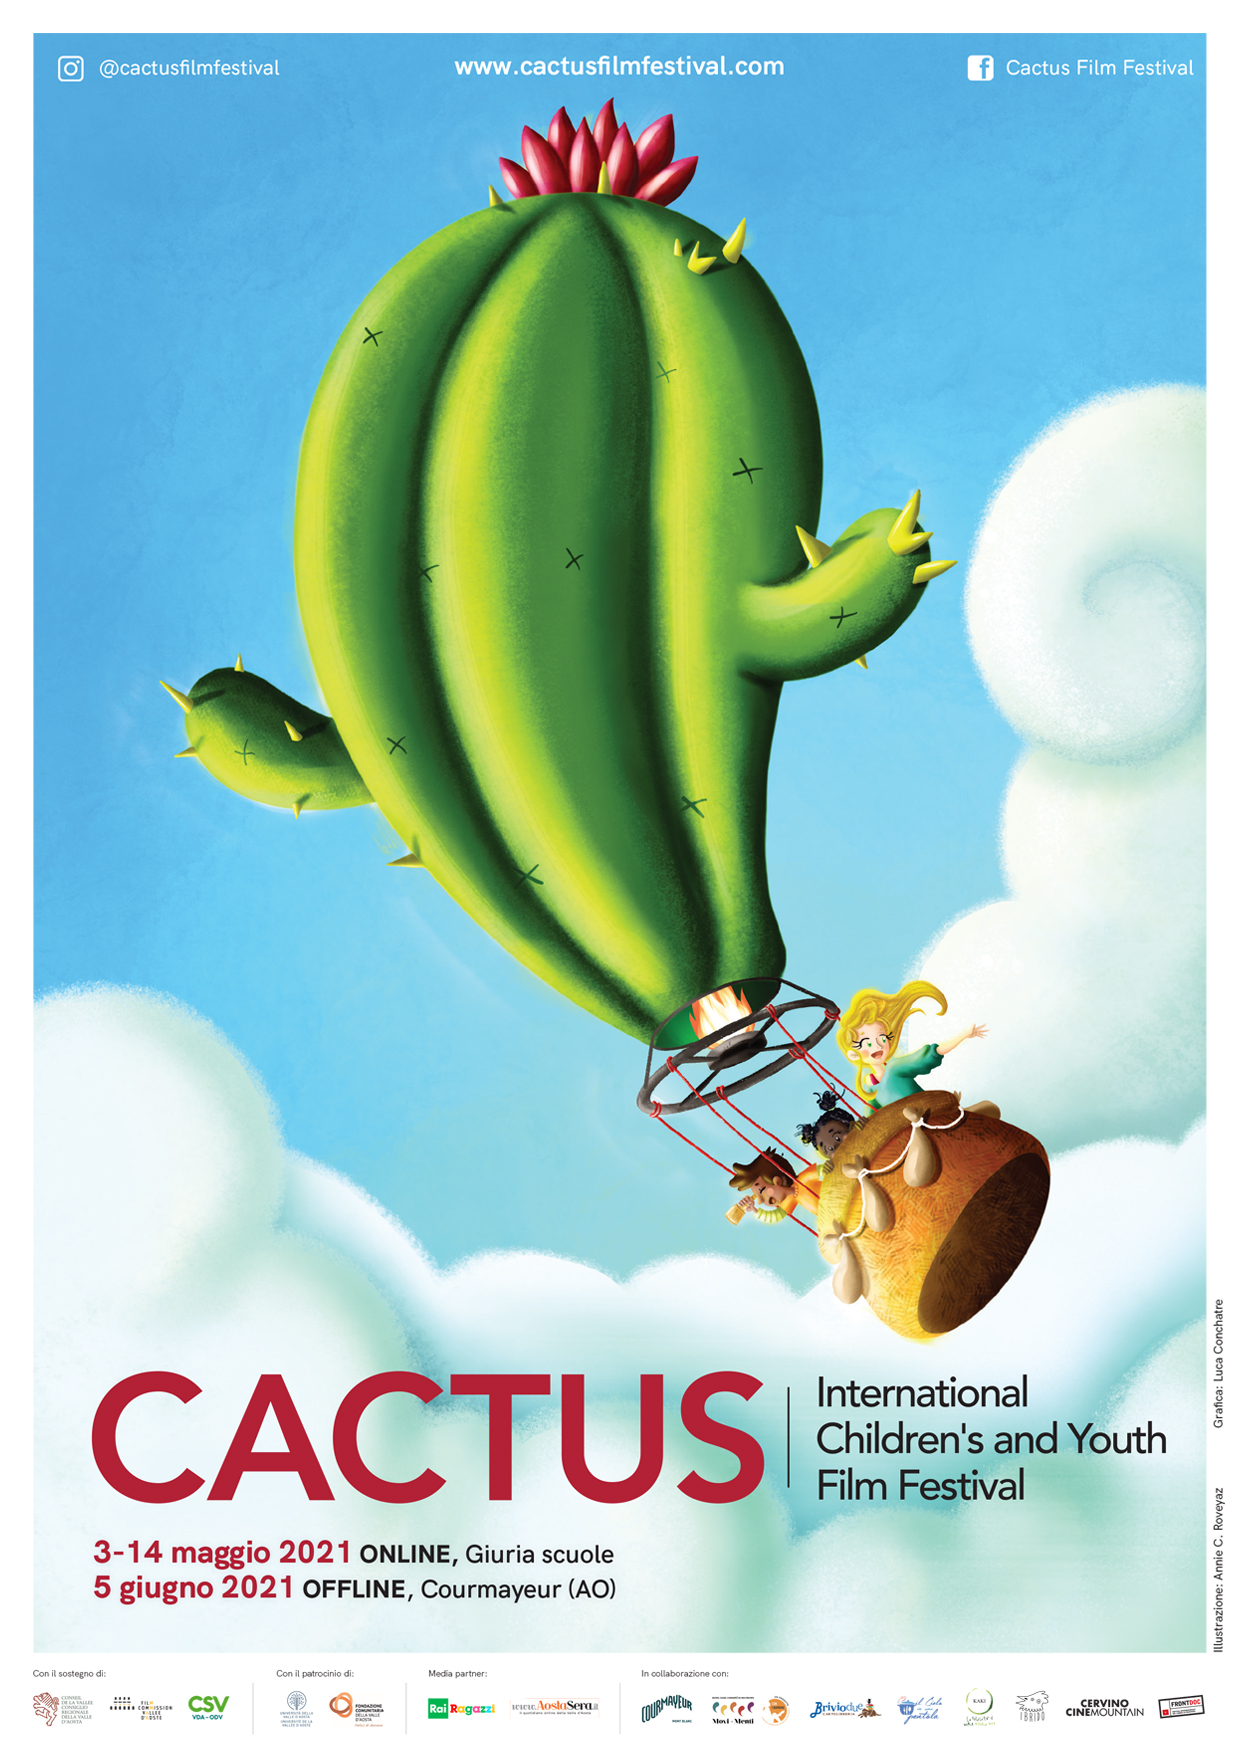 Cactus International Childrens and Youth Film Festival